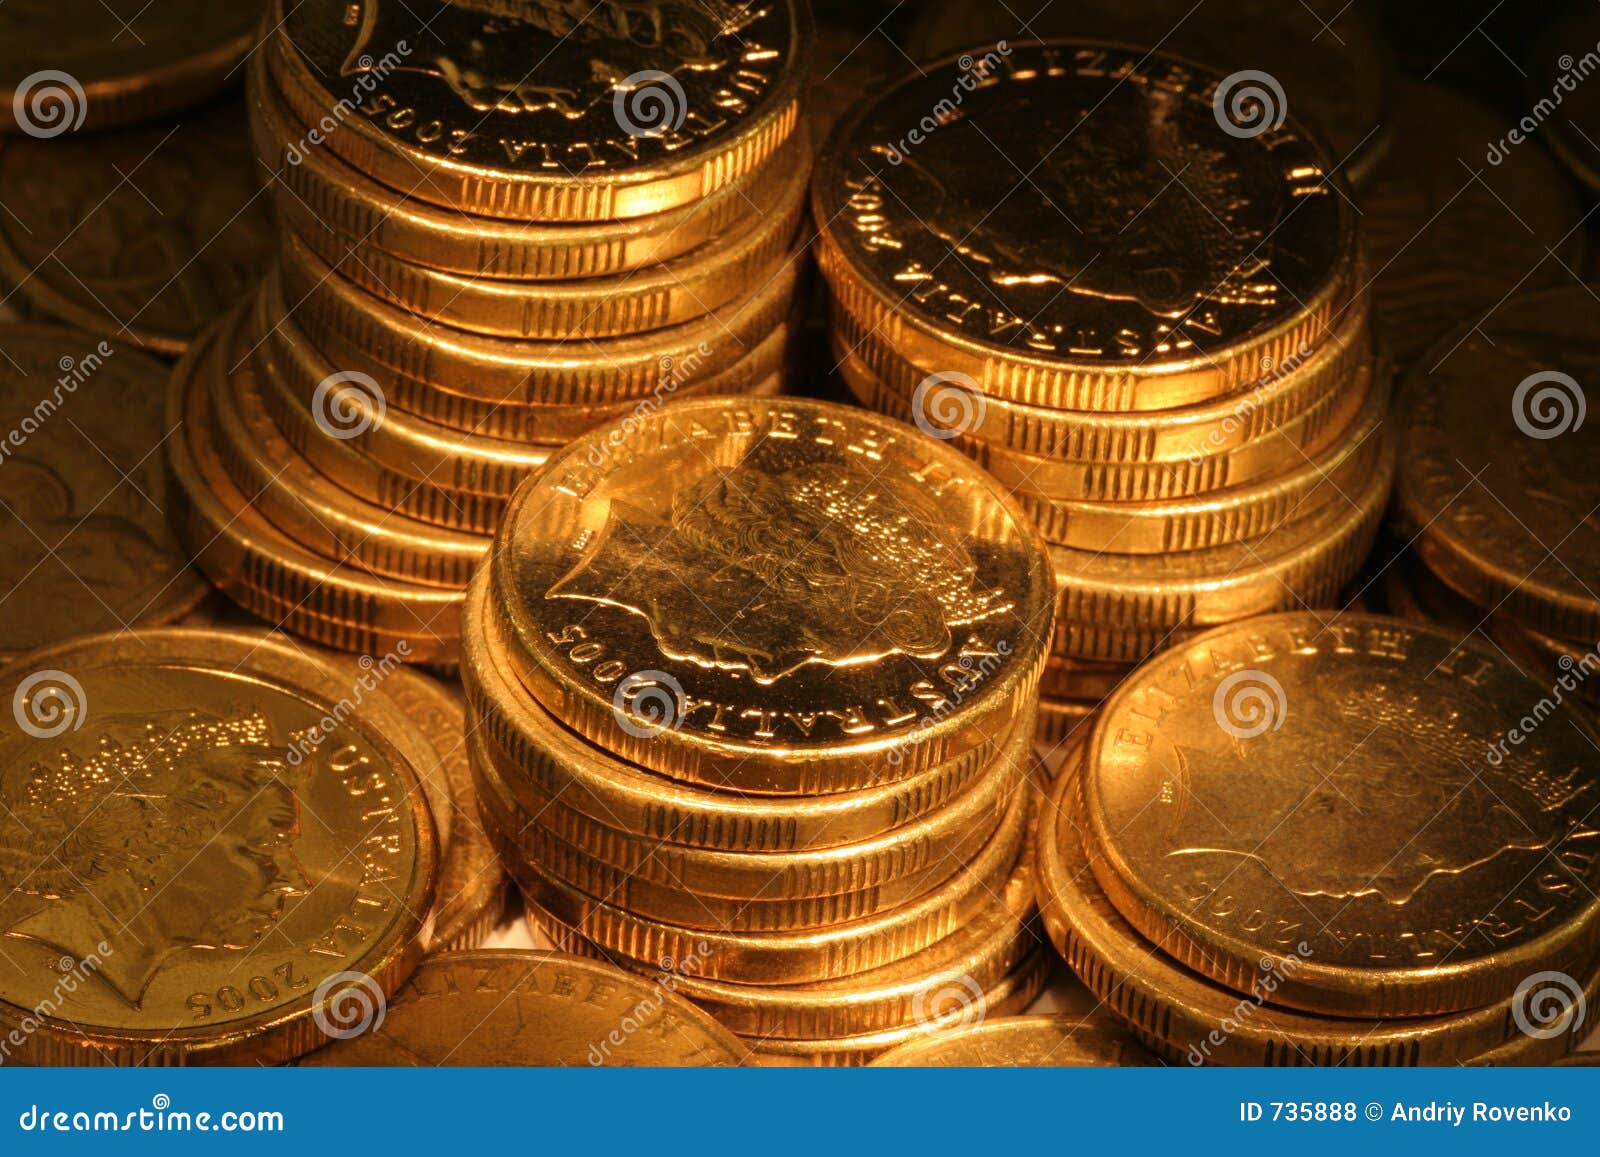 Golden coins stock photo. Image of finances, value, gold - 735888